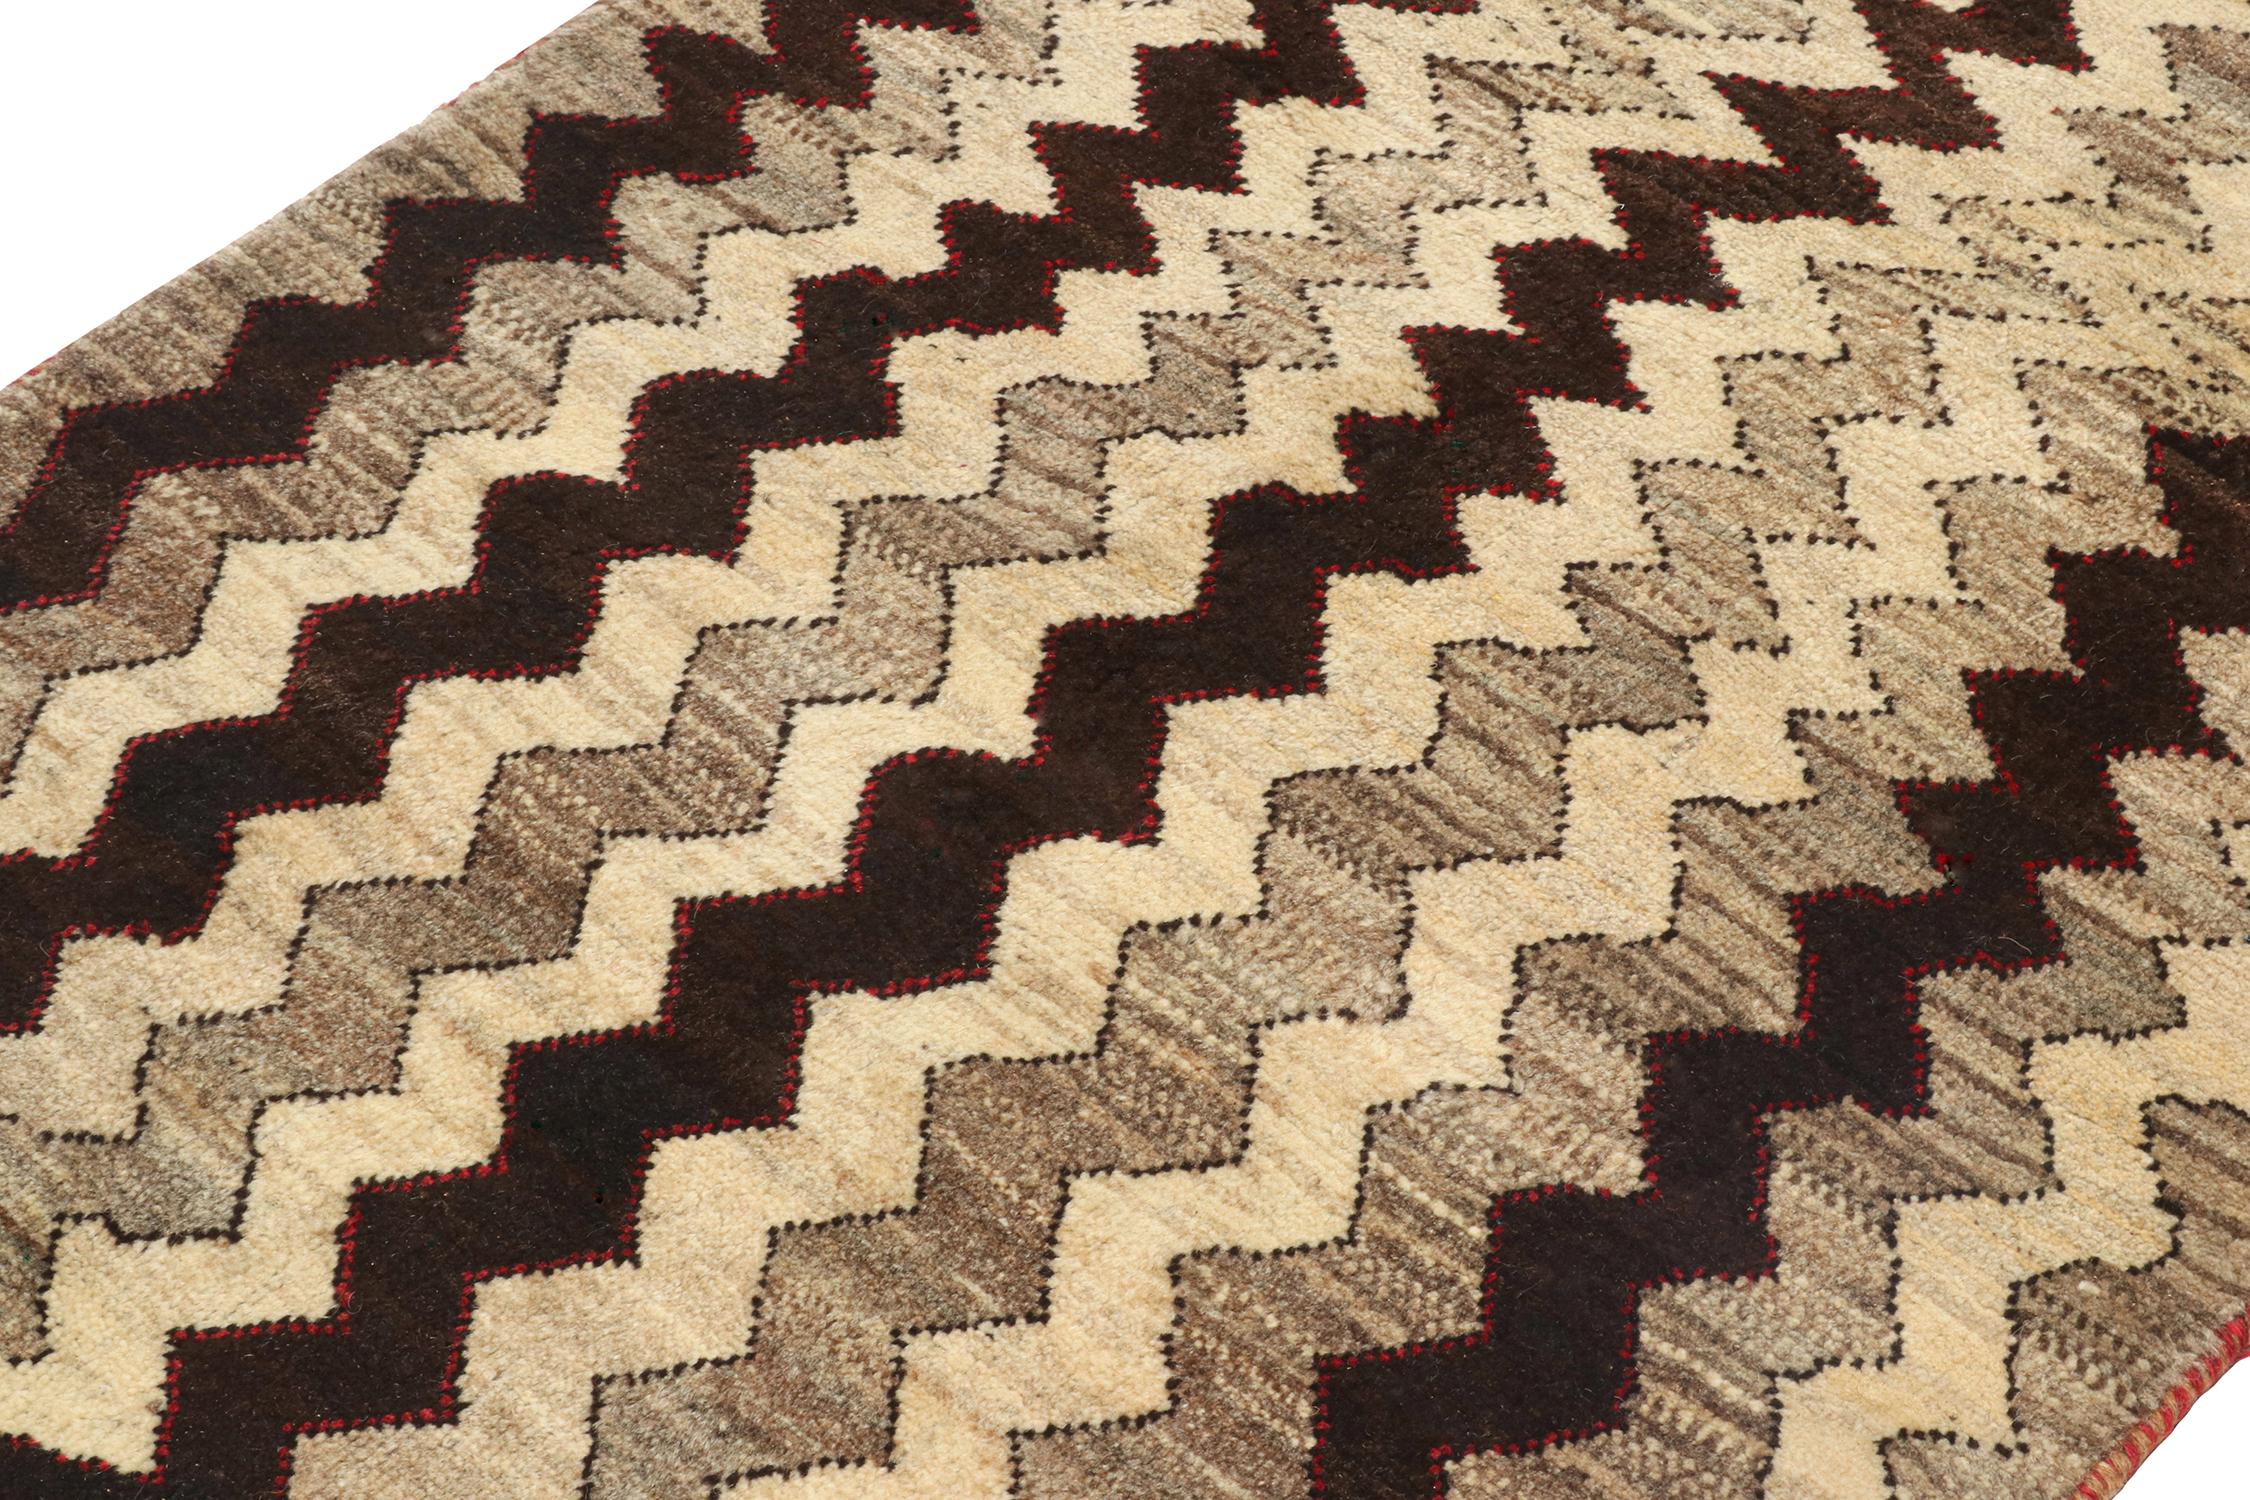 Hand-Knotted Vintage Gabbeh Tribal Rug in Beige-Brown & Black Chevron Patterns by Rug & Kilim For Sale